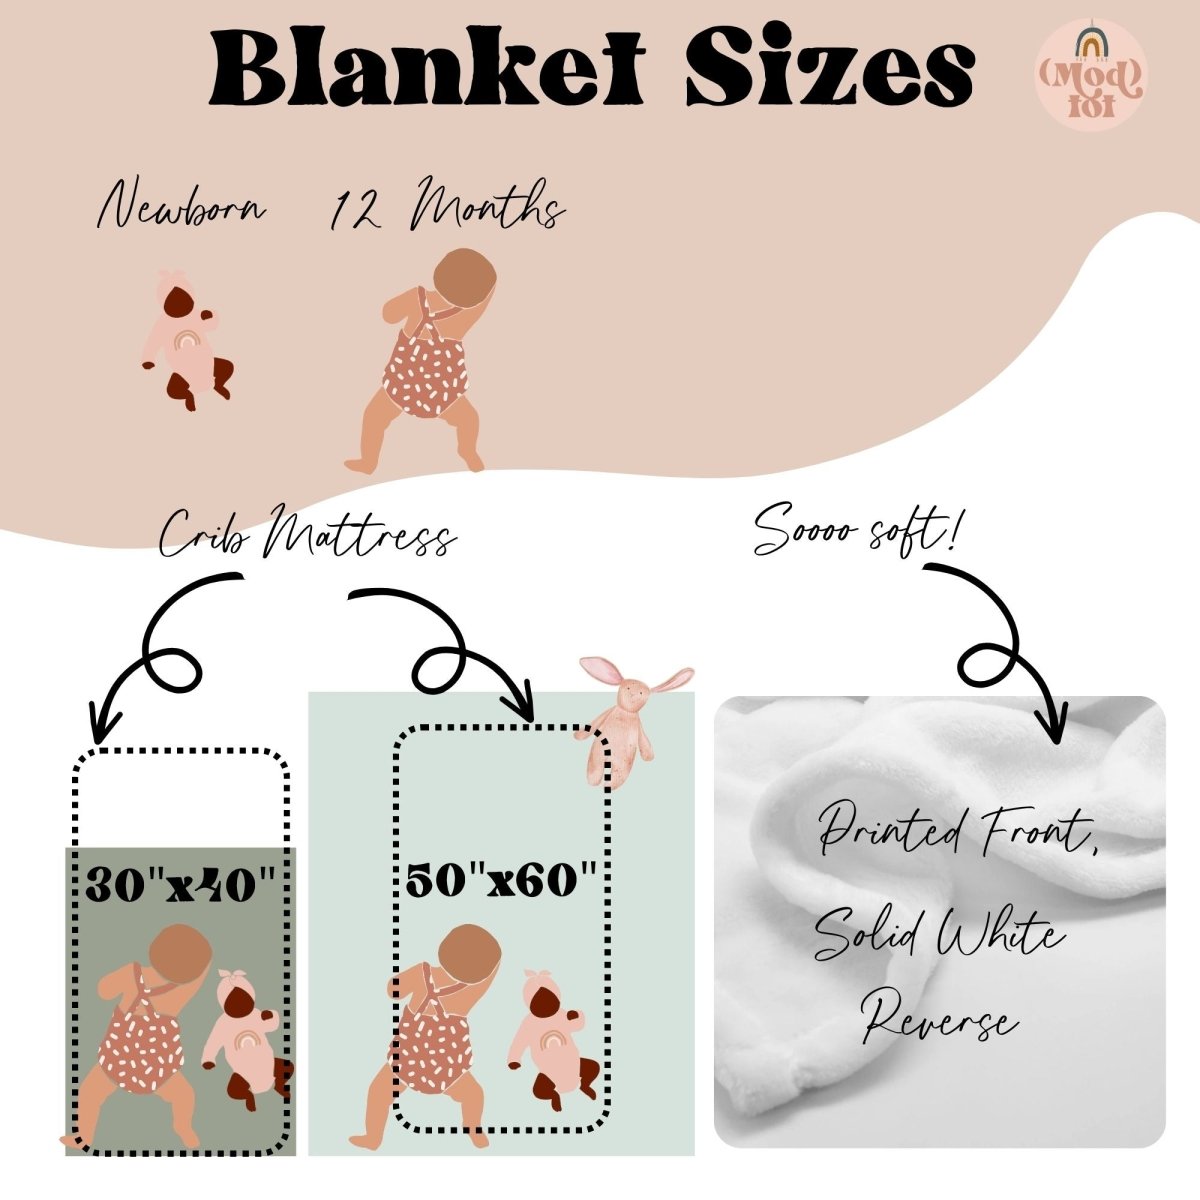 Daisy Personalized Minky Blanket - Daisy, gender_girl, Personalized_Yes